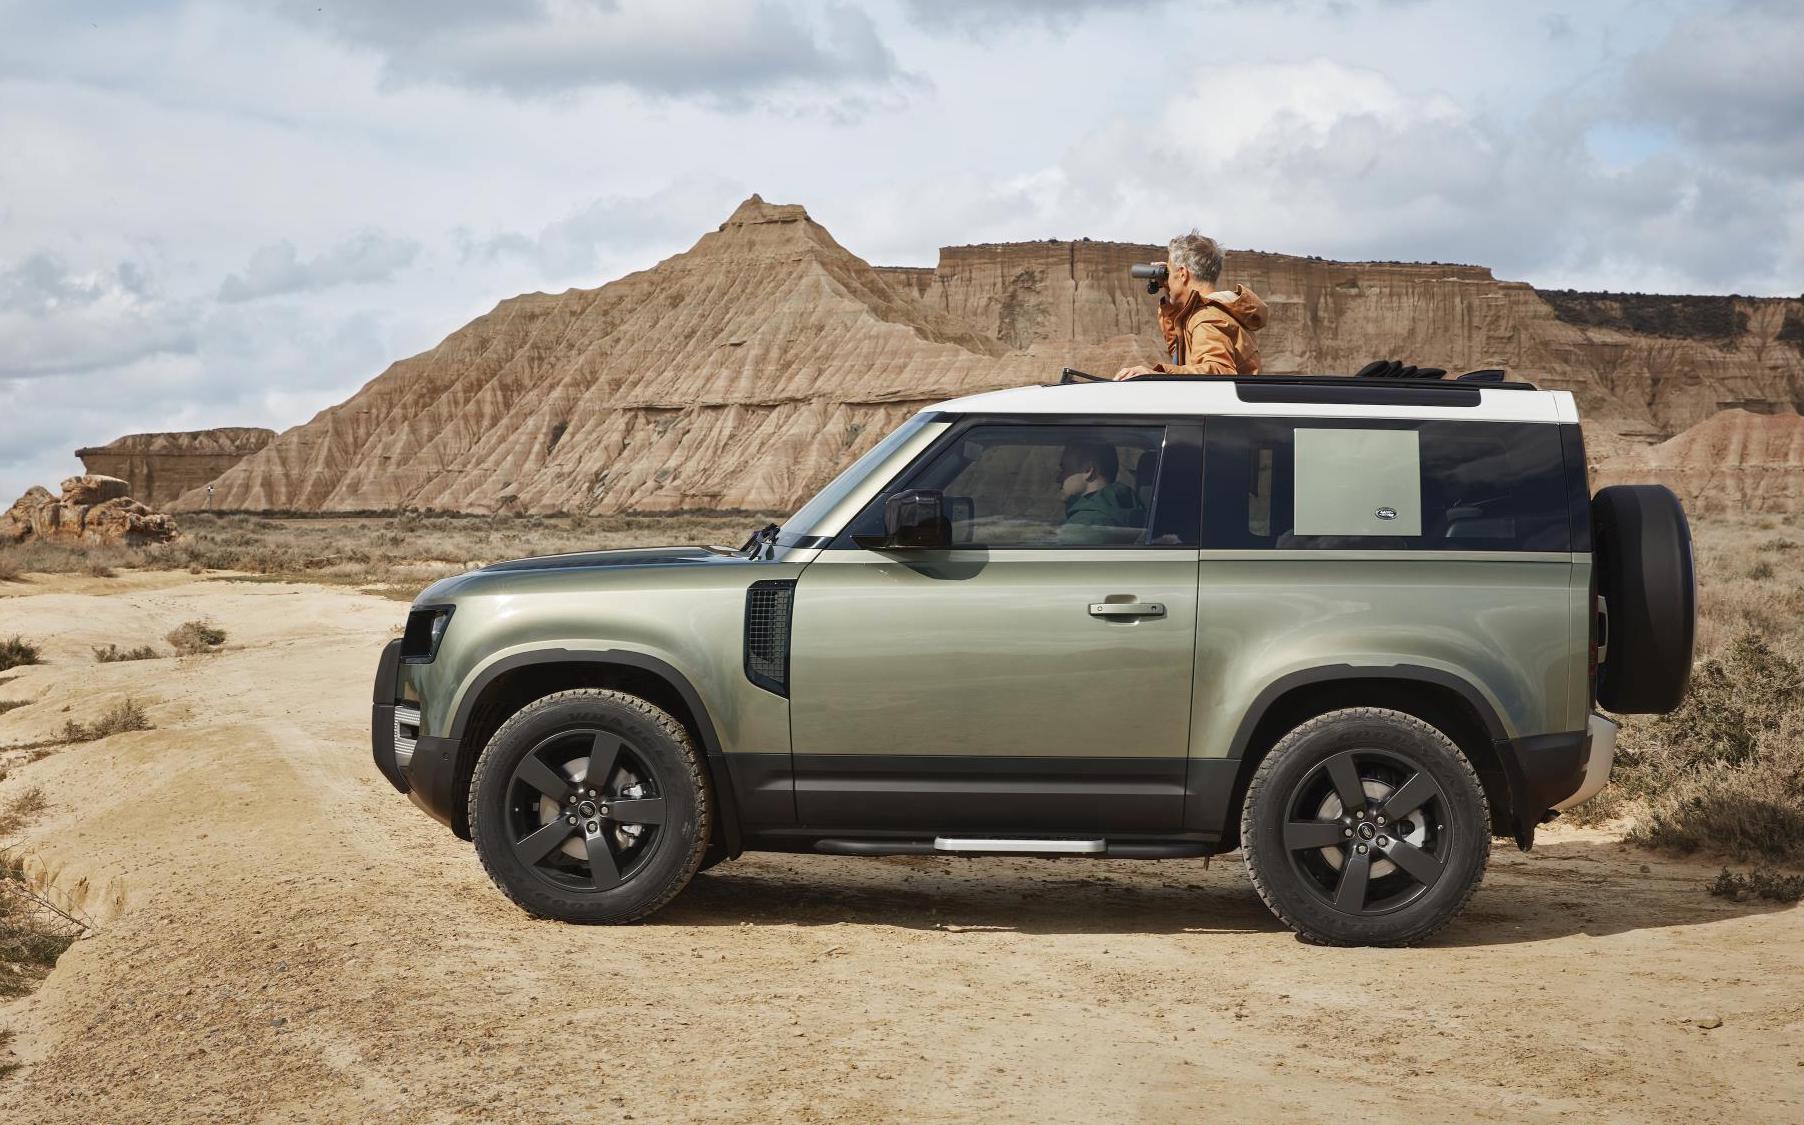 2020 Land Rover Defender officially unveiled - PerformanceDrive